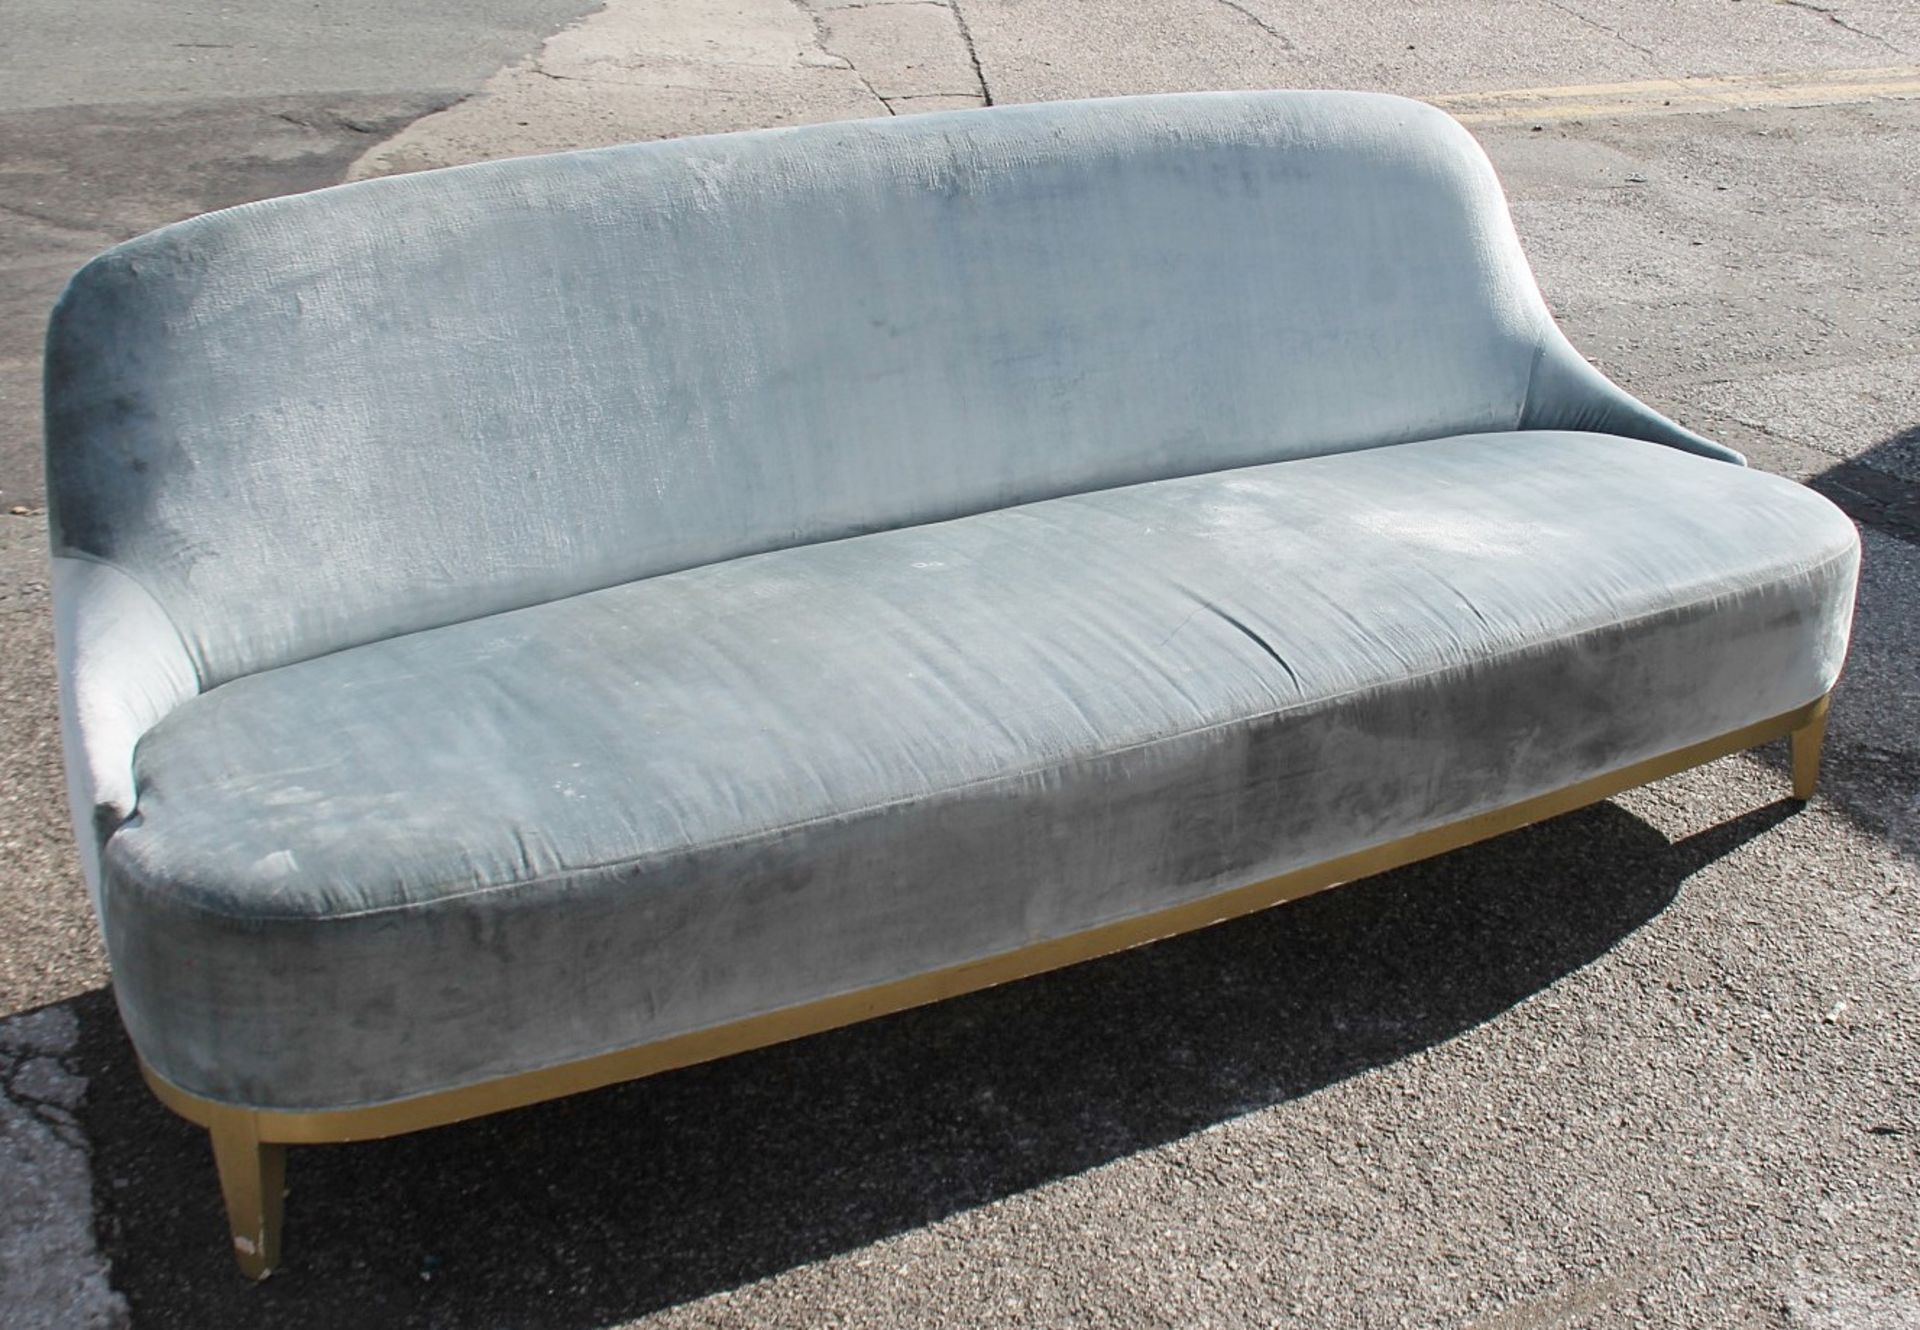 1 x Opulent Velvet Upholstered Sofa In Blue-Silver Tone With A Curved Base In Gold - Image 2 of 13